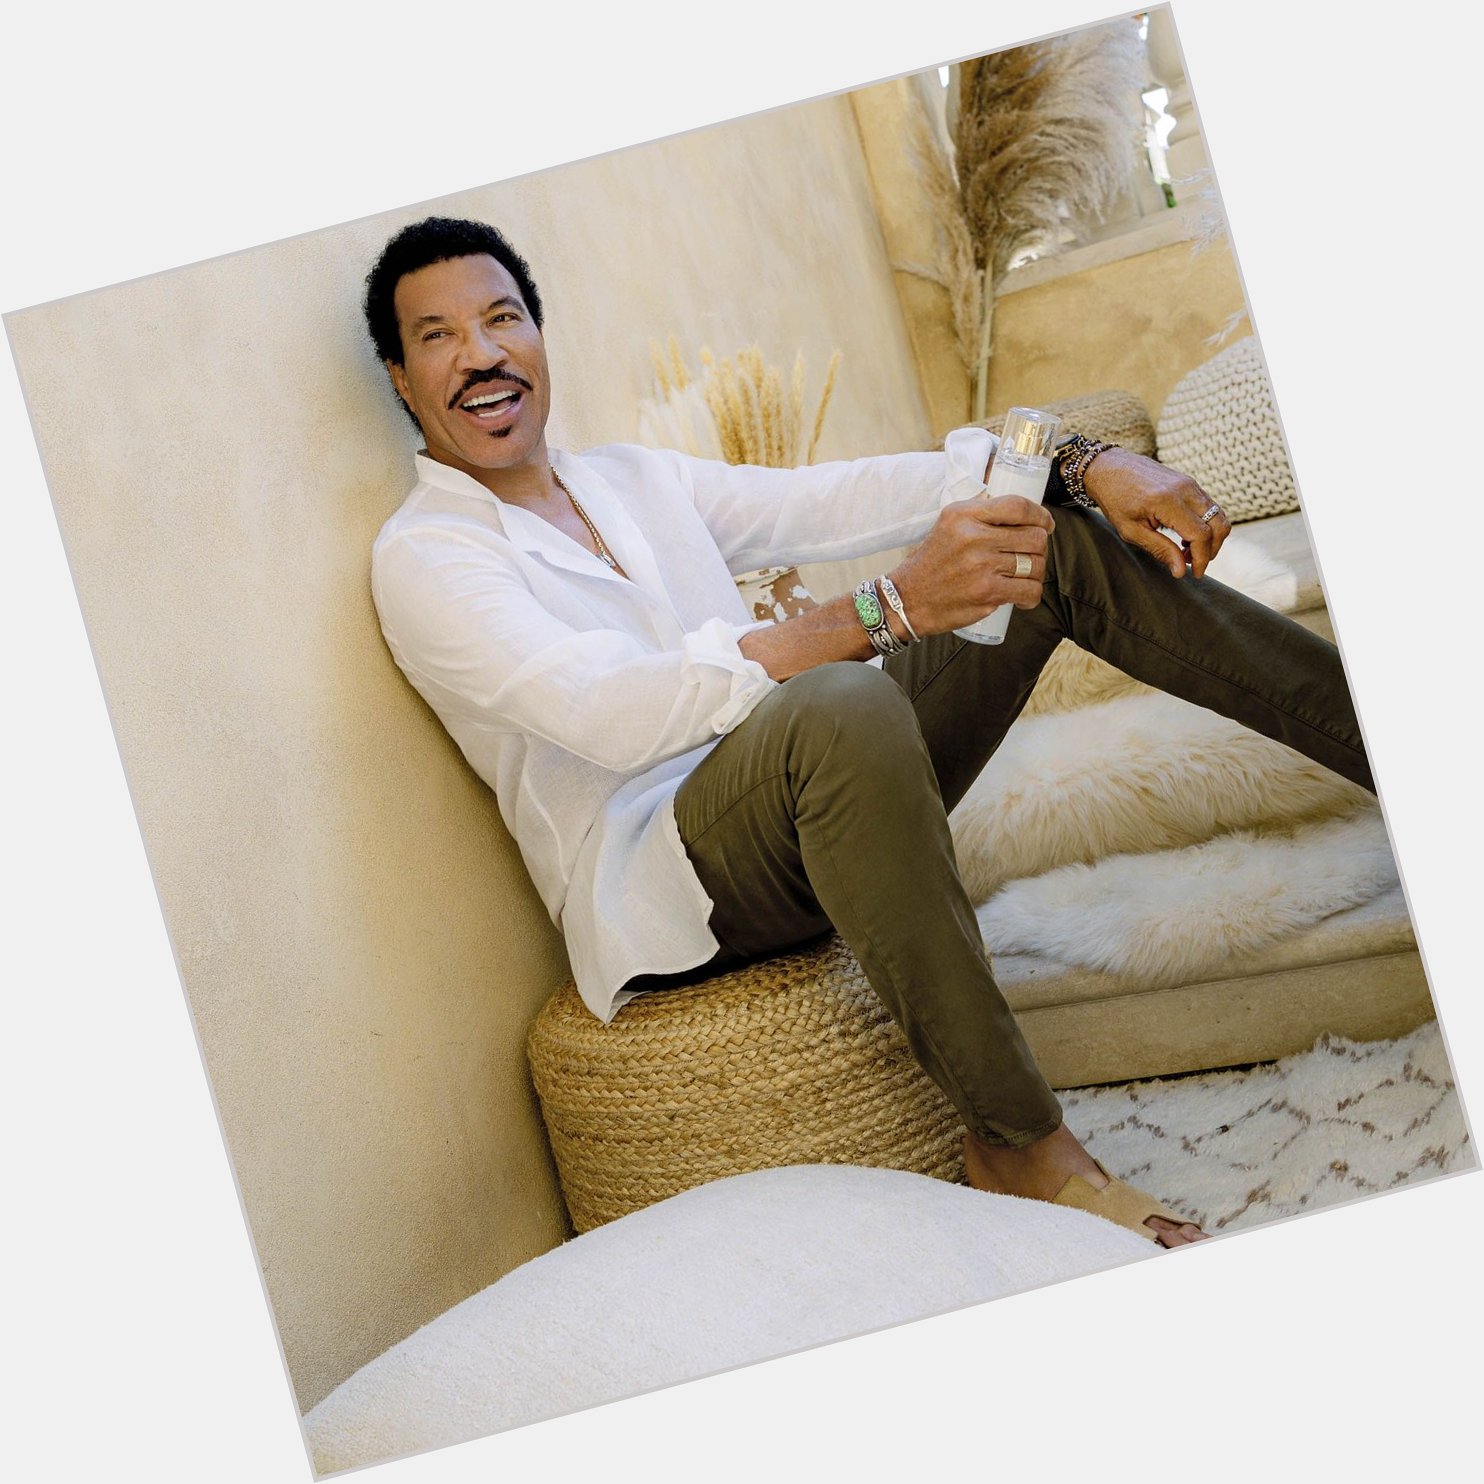 Happy Birthday Lionel Richie! Celebrating your special day and your music! 